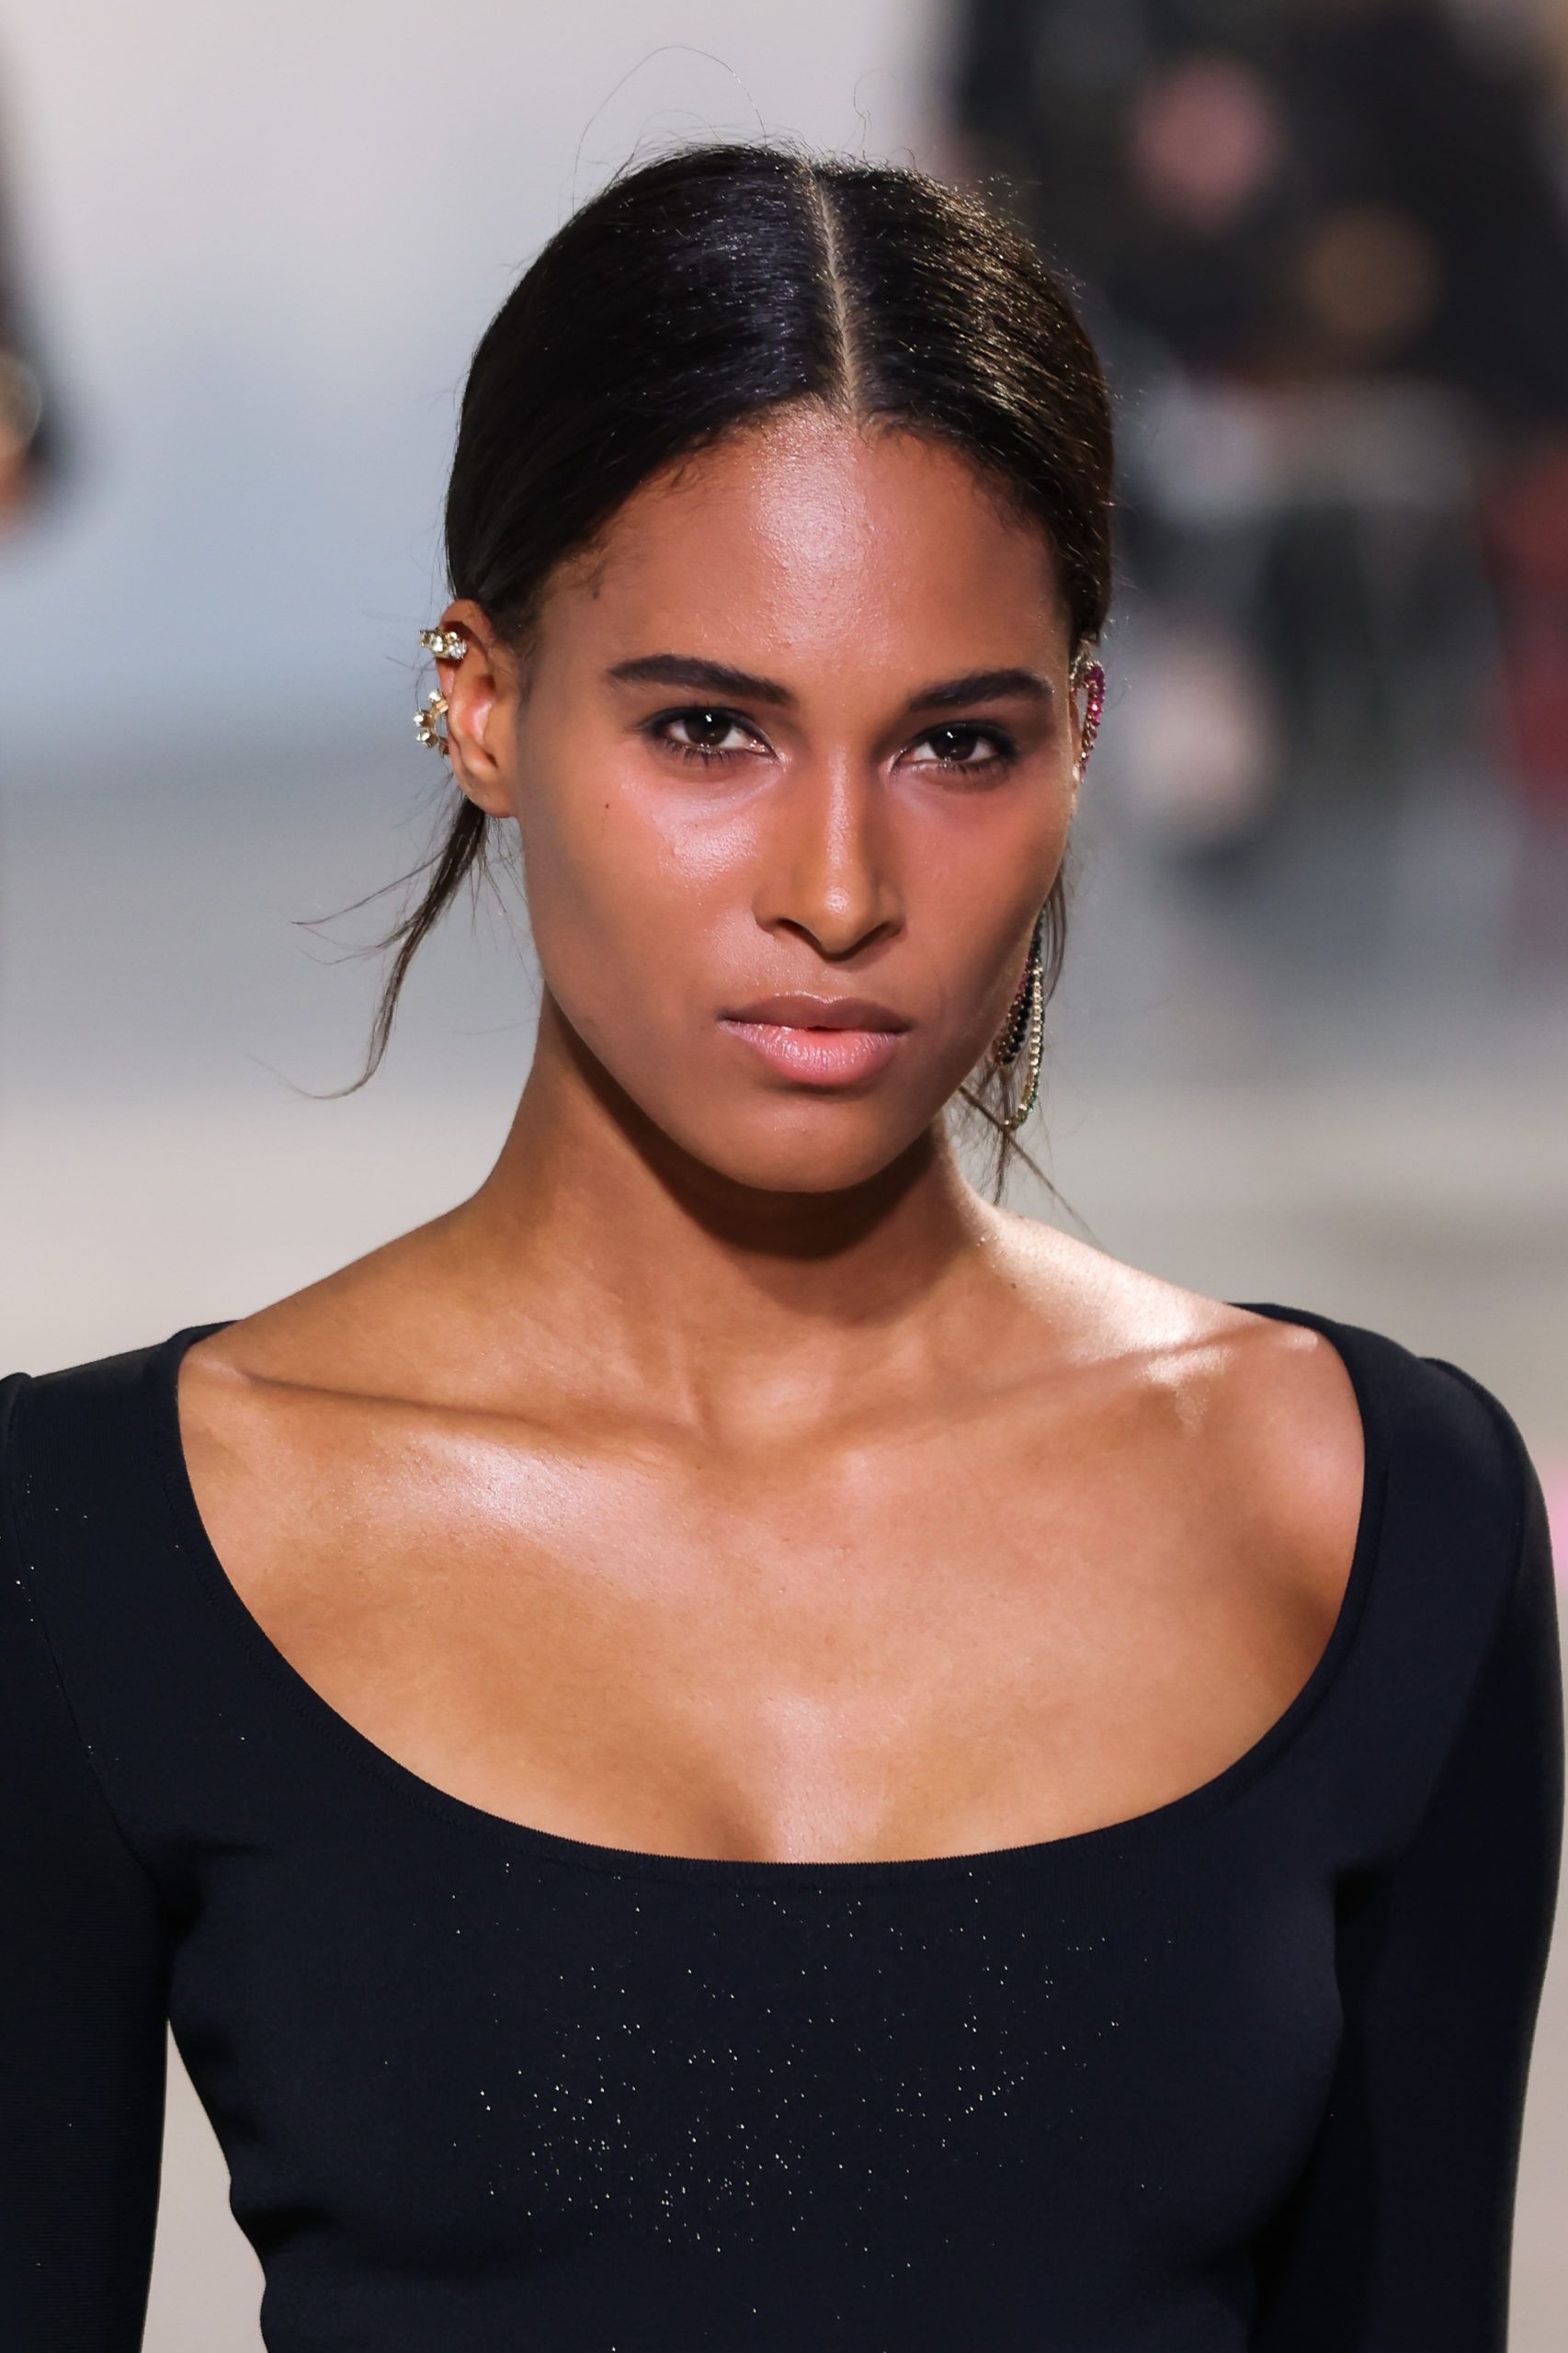 Top Hair And Makeup Trends From Paris Fashion Week F/W 2022